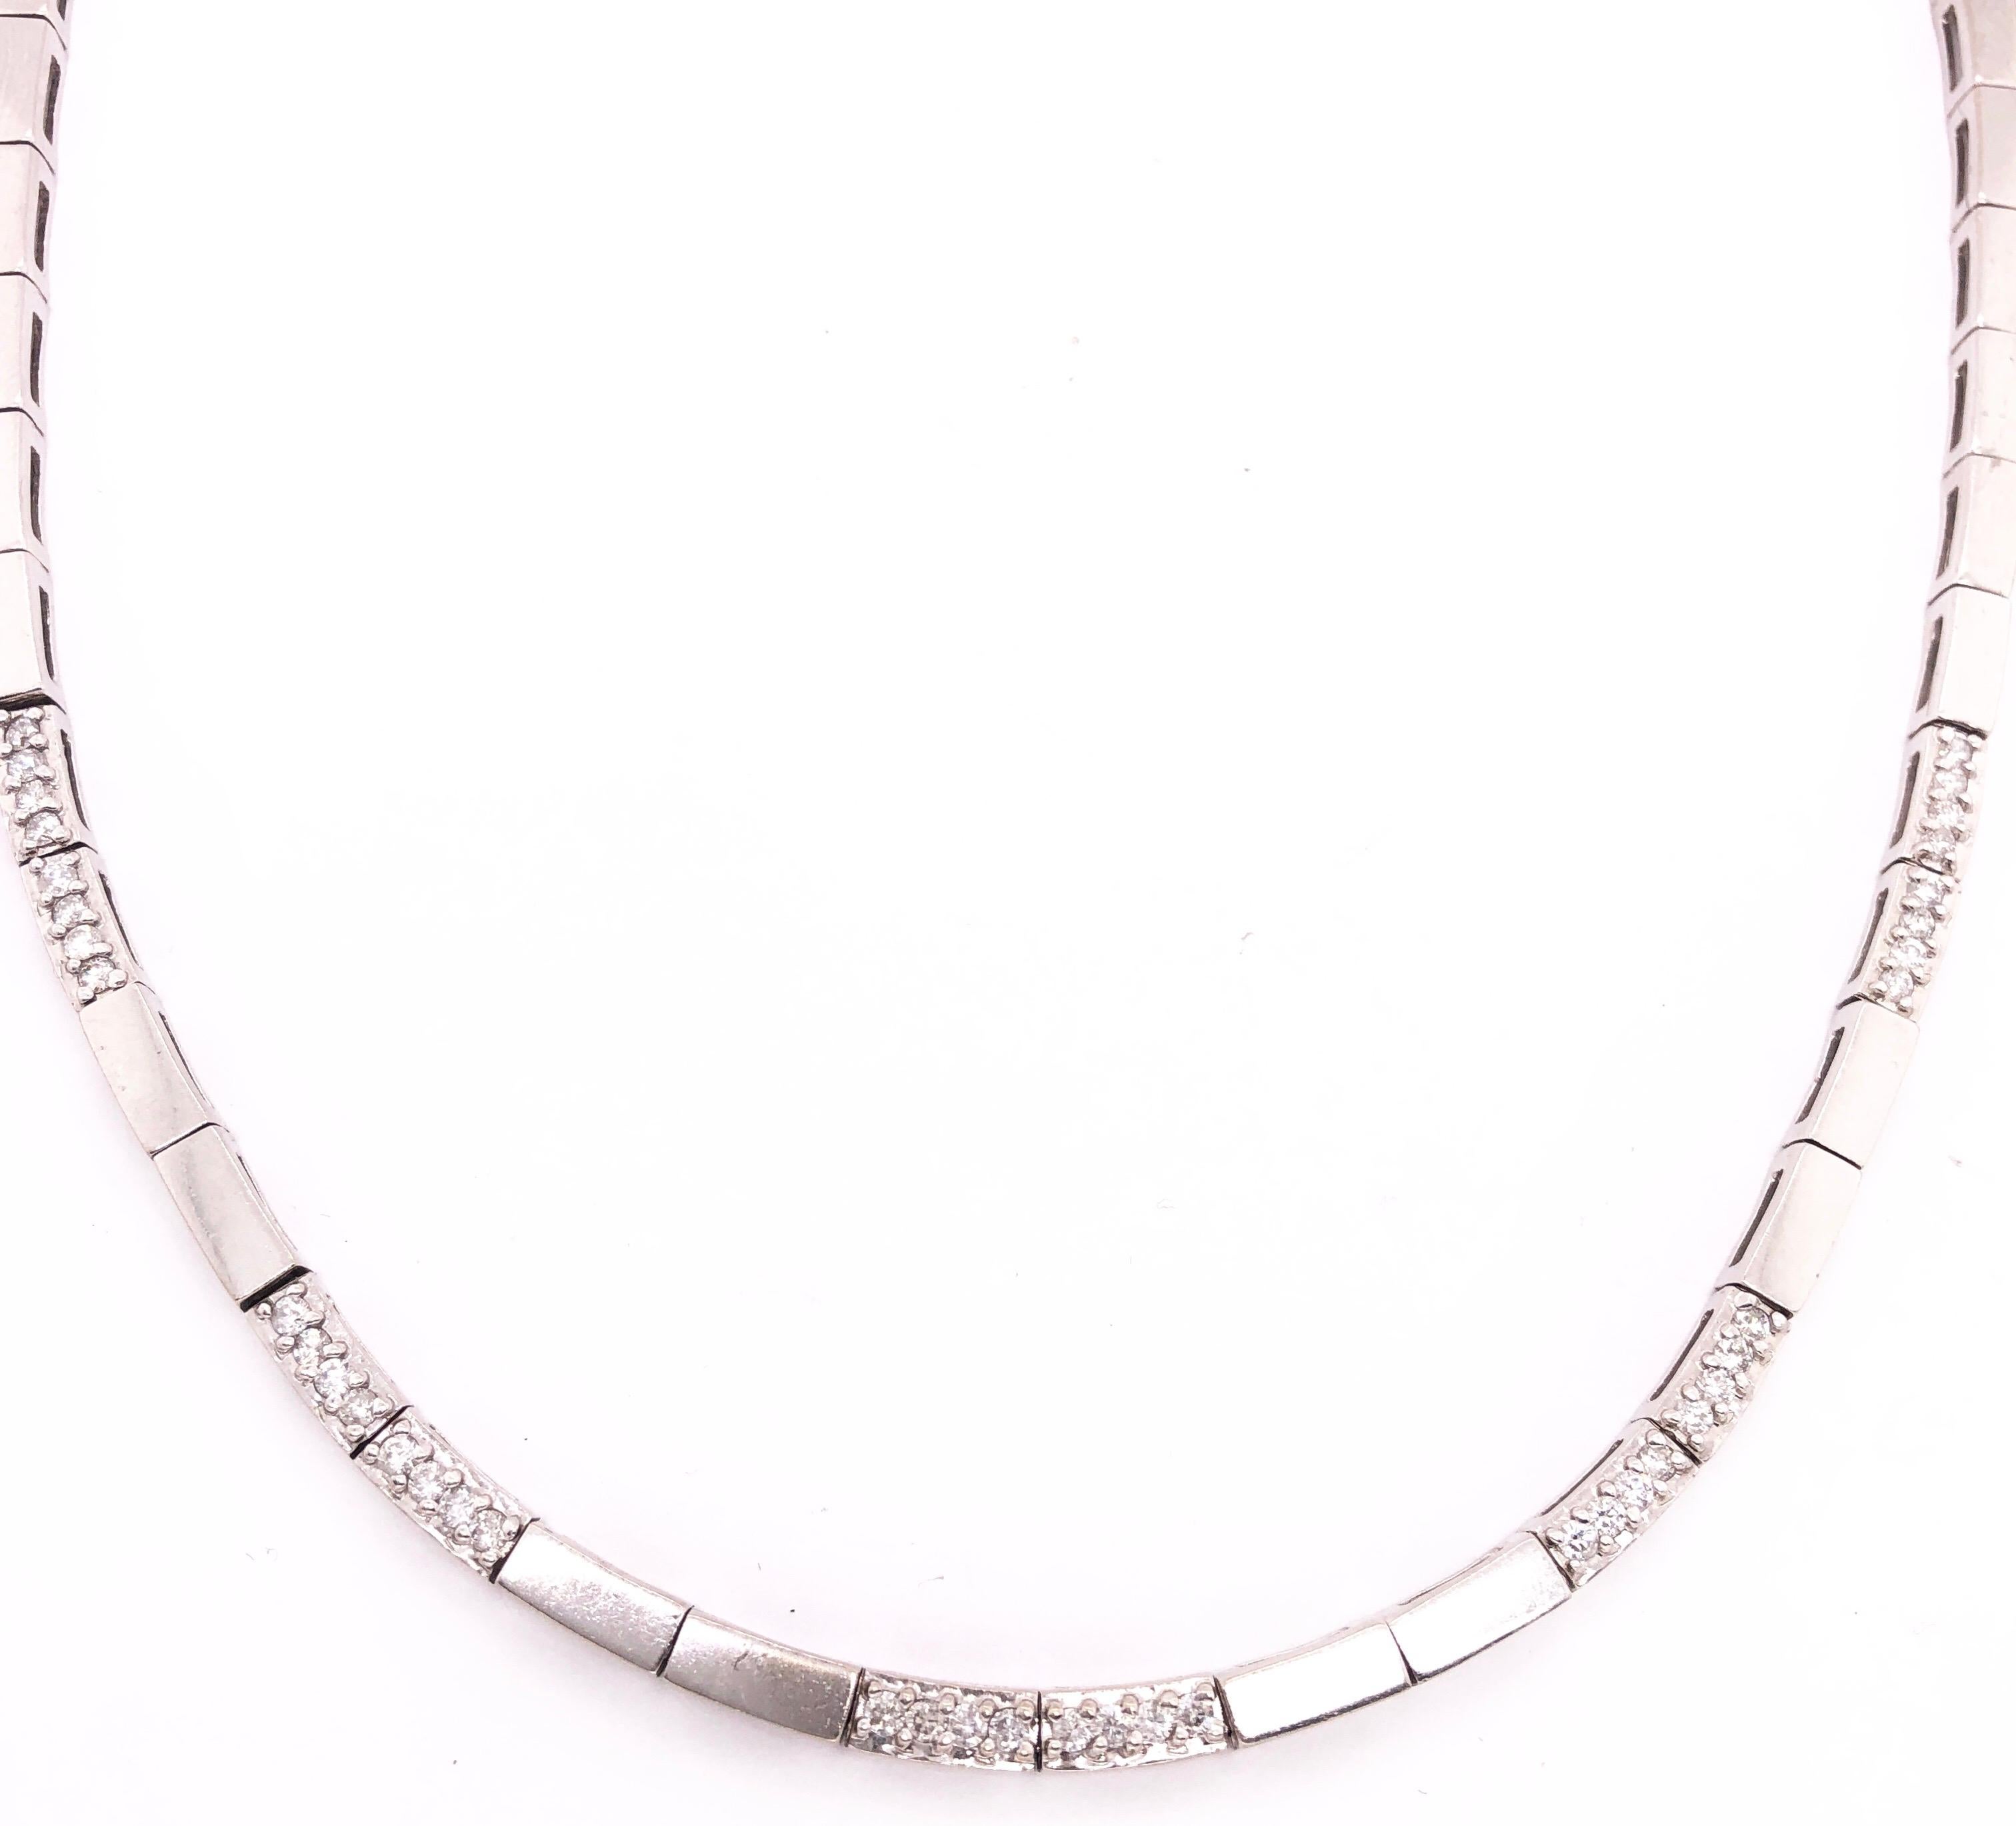 14 Karat White Gold 16 Inch Fancy Link Necklace with Diamonds.
1.20 total diamond weight.
24 grams total weight.